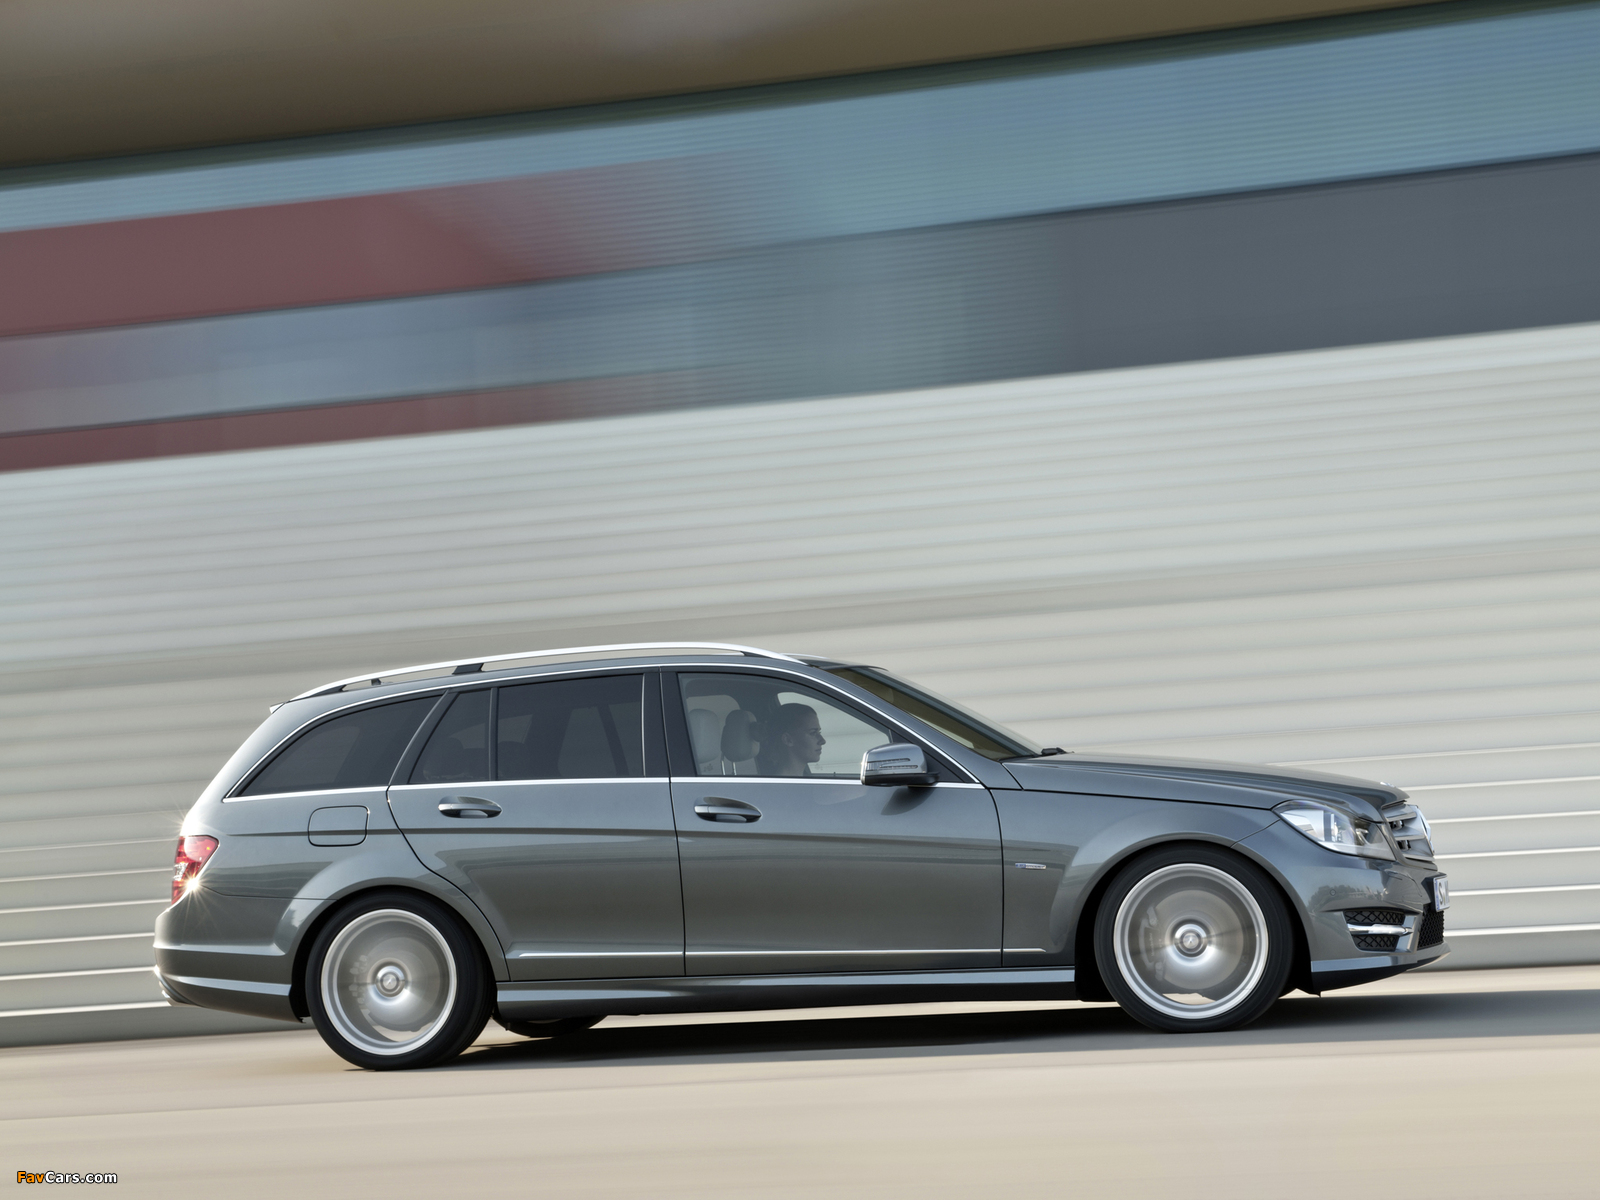 Mercedes-Benz C 350 CDI 4MATIC AMG Sports Package Estate (S204) 2011 photos (1600 x 1200)